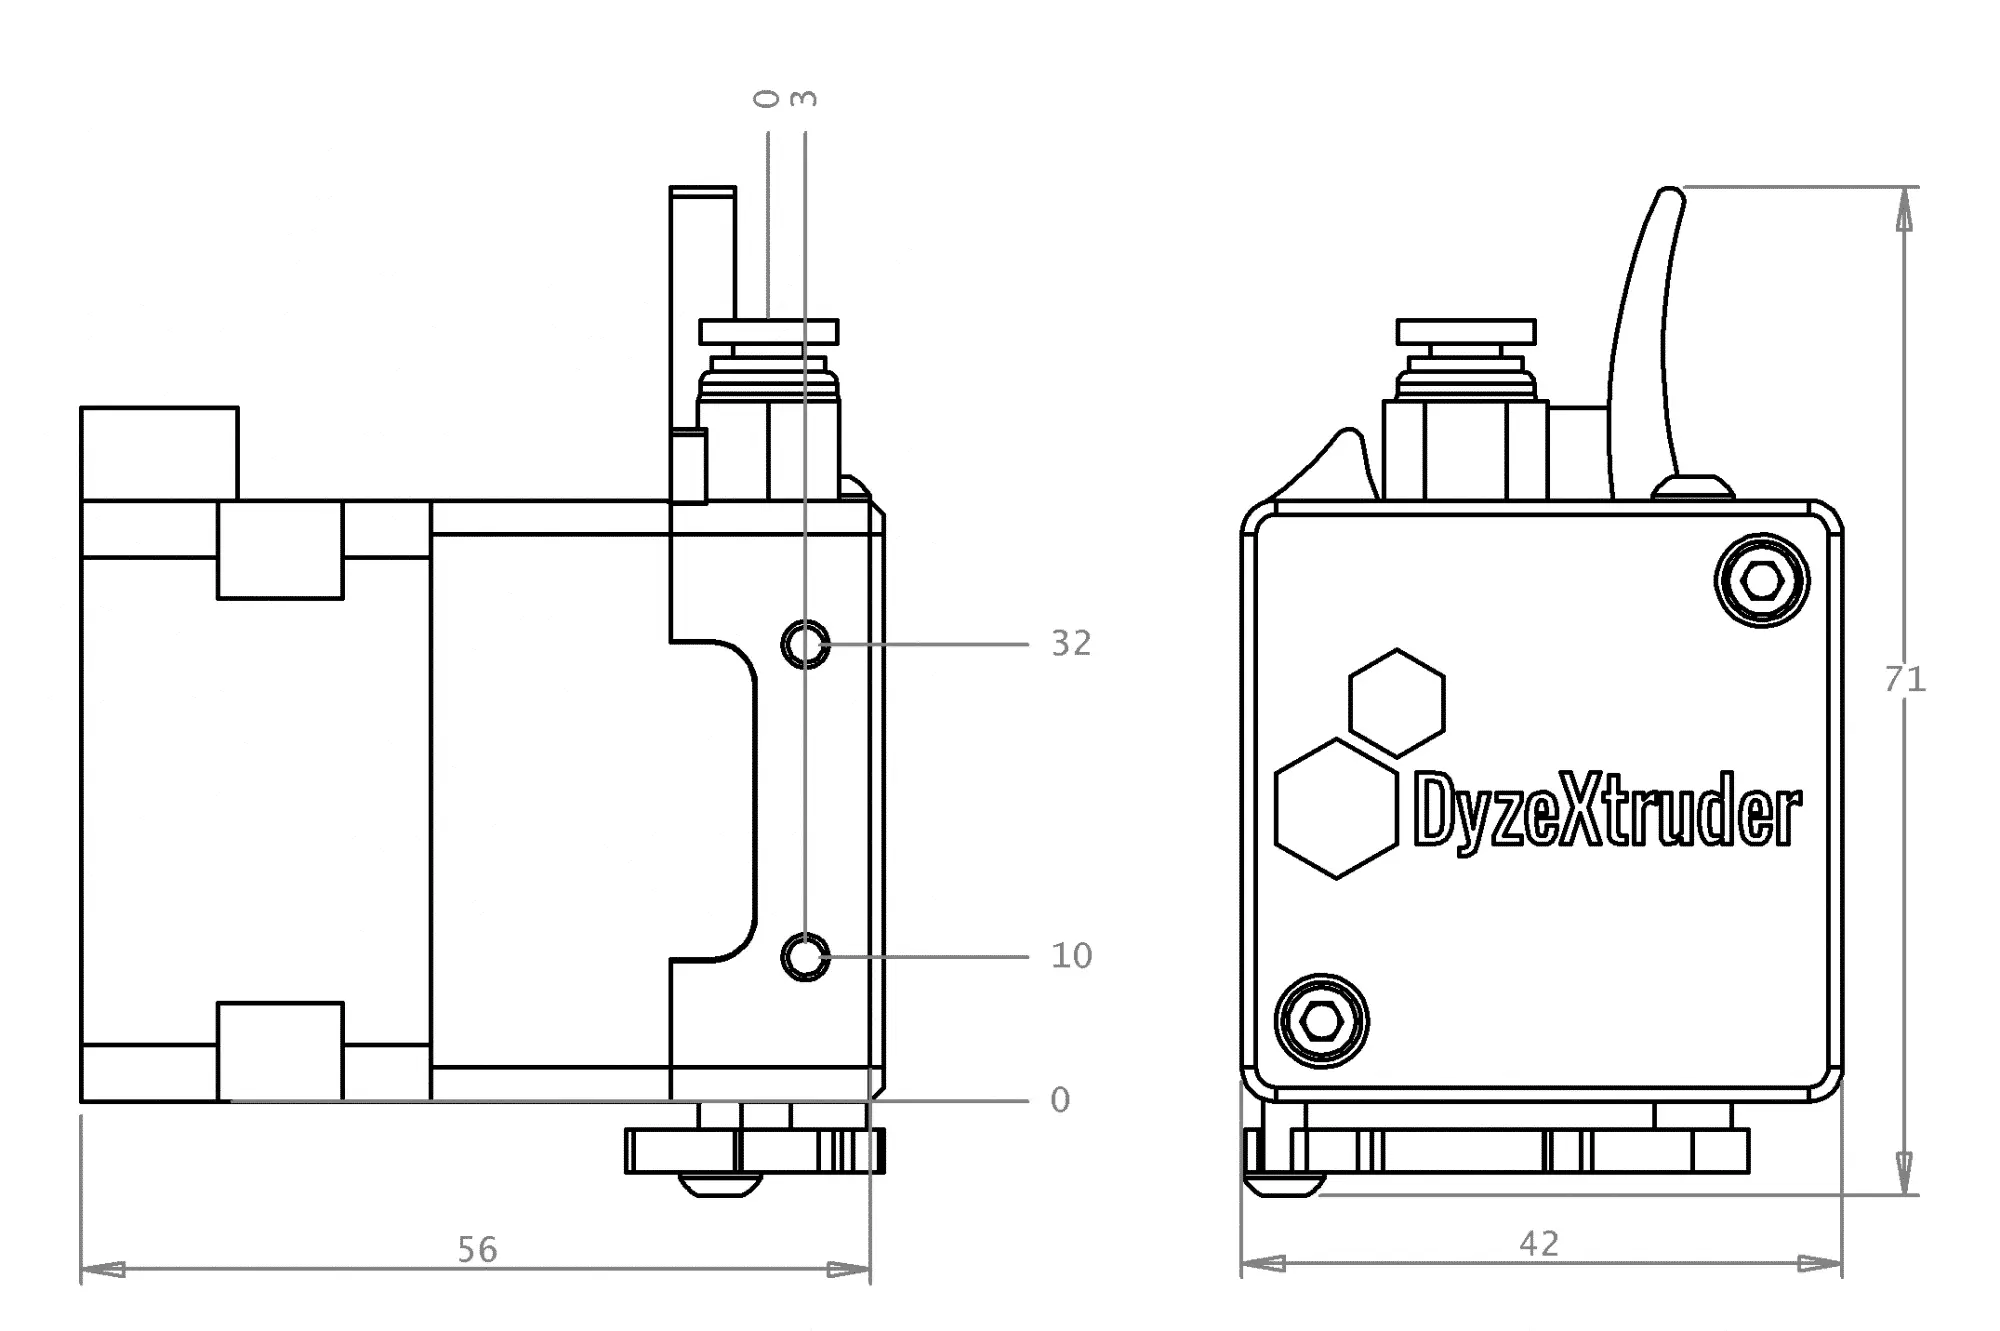 DyzeXtruder GT Dimensions